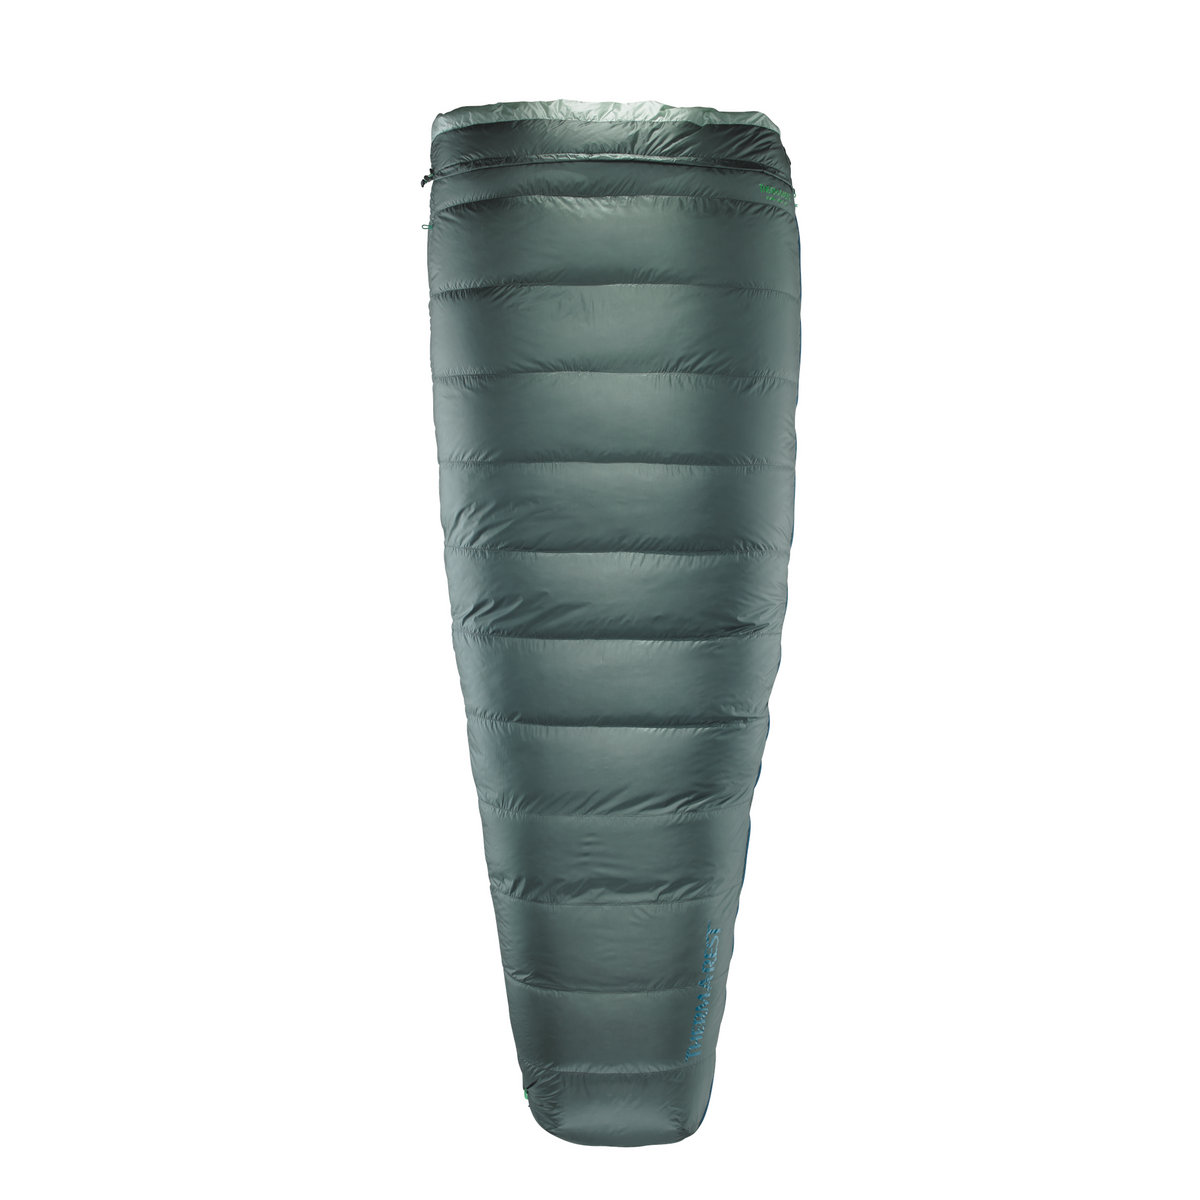 Thermarest Ohm 20F/-6C sleeping bag in Balsam colour, long length